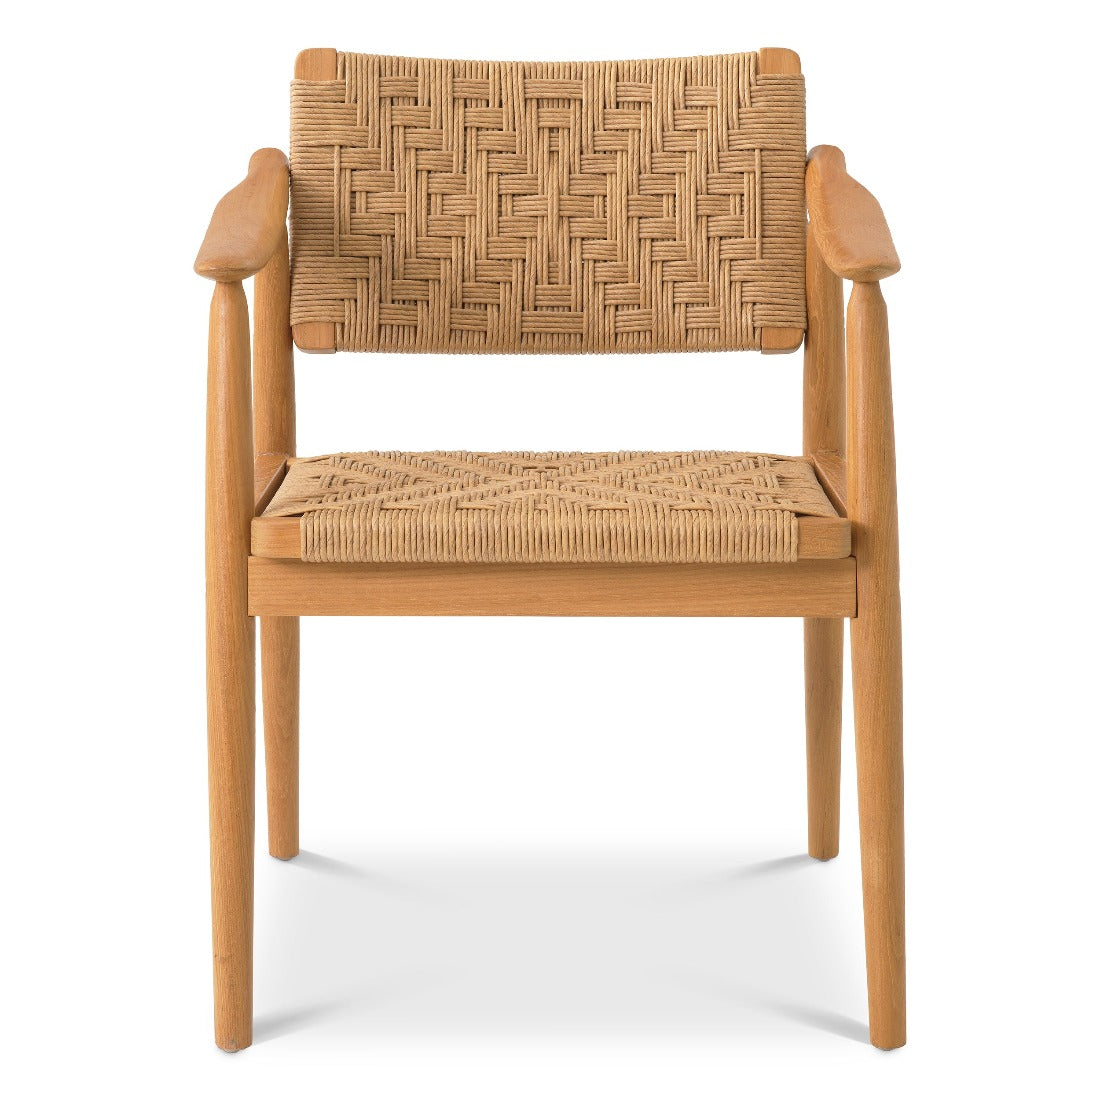 Outdoor dining chair Eichholtz Coral Bay Naturel set of 2